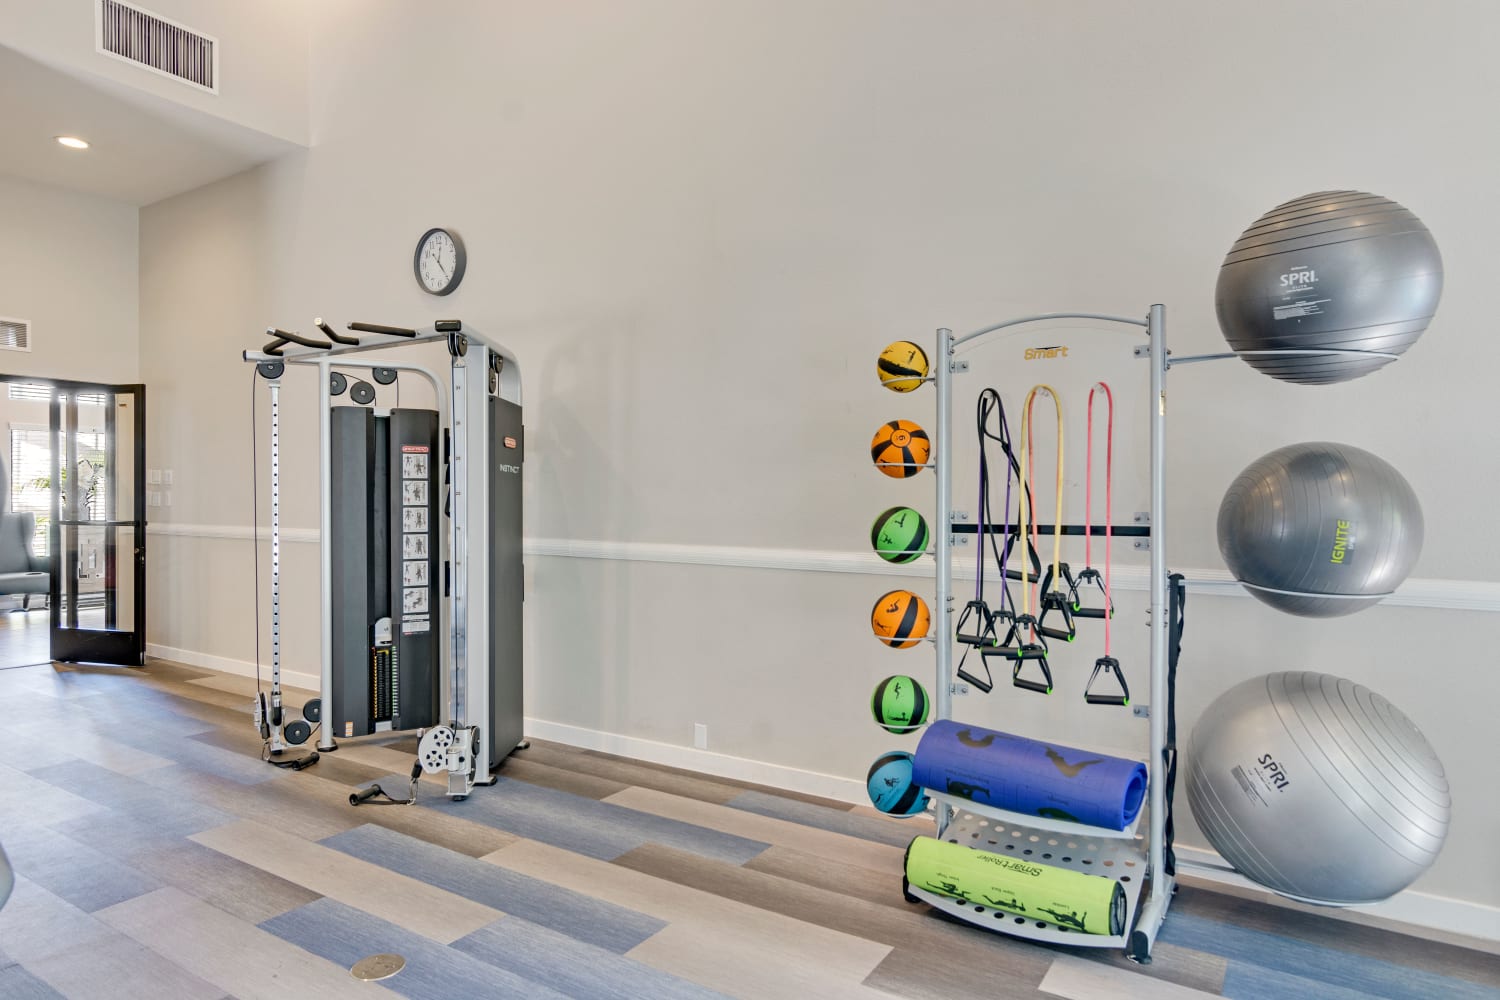 Fitness center equipment at Waterford Place Apartments in Mesa, Arizona